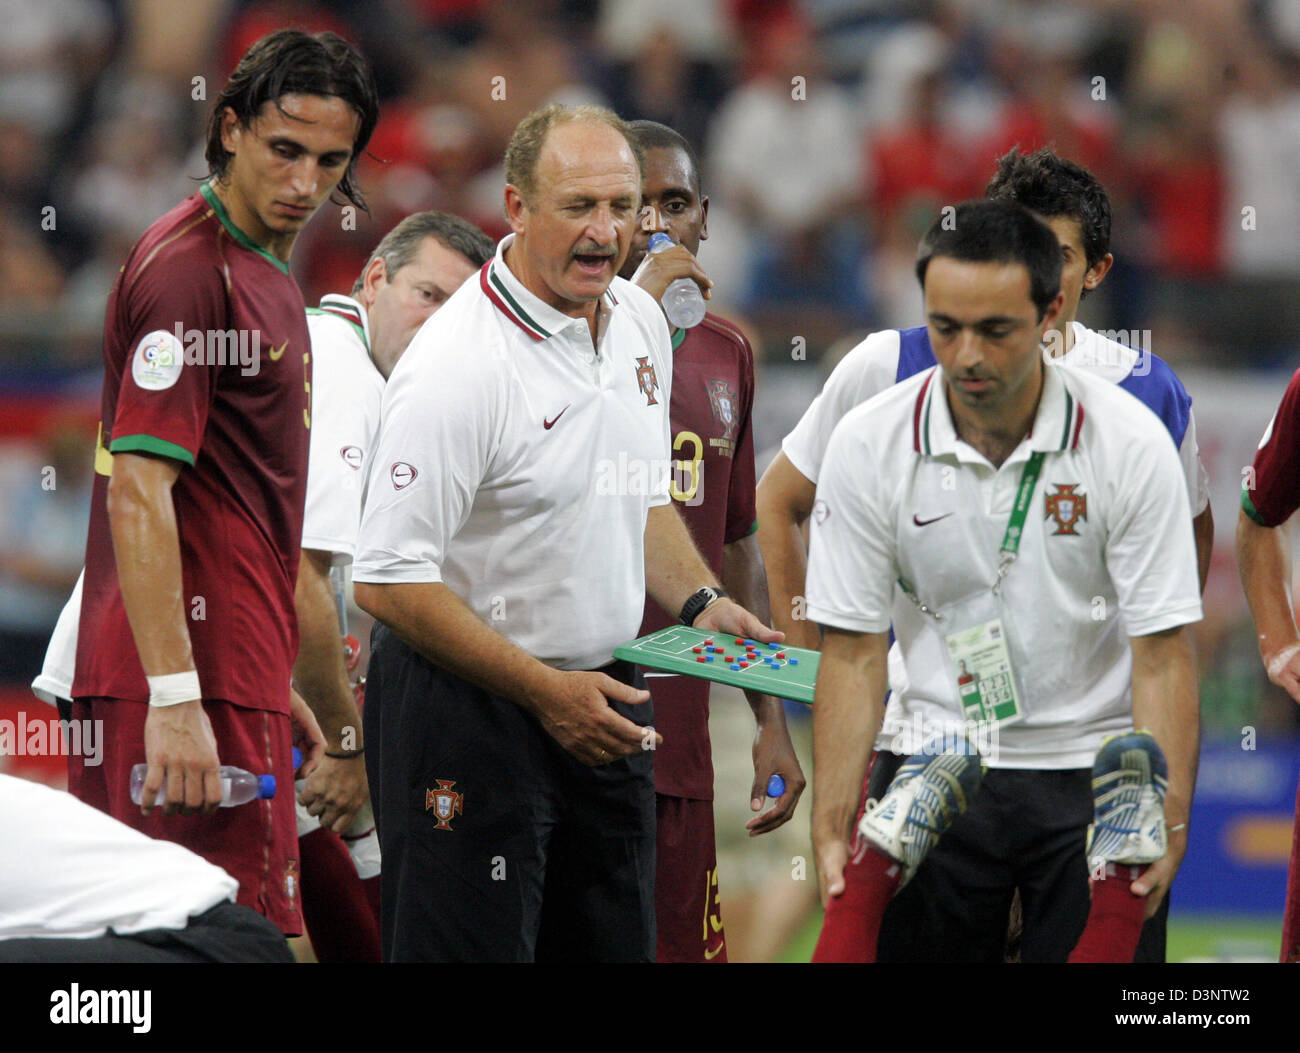 Portugal national coach Brazilian Luiz Felipe Scolari (2nd L) from Portugal explains his tactic to the players during the break before extra time during the 2006 FIFA World Cup Quarter-finals match England vs Portugal in Gelsenkirchen, Germany, Saturday 01 July 2006. DPA/BERND THISSEN +++ Mobile Services OUT +++ Please refer to FIFA's terms and conditions +++(c) dpa - Bildfunk+++ Stock Photo